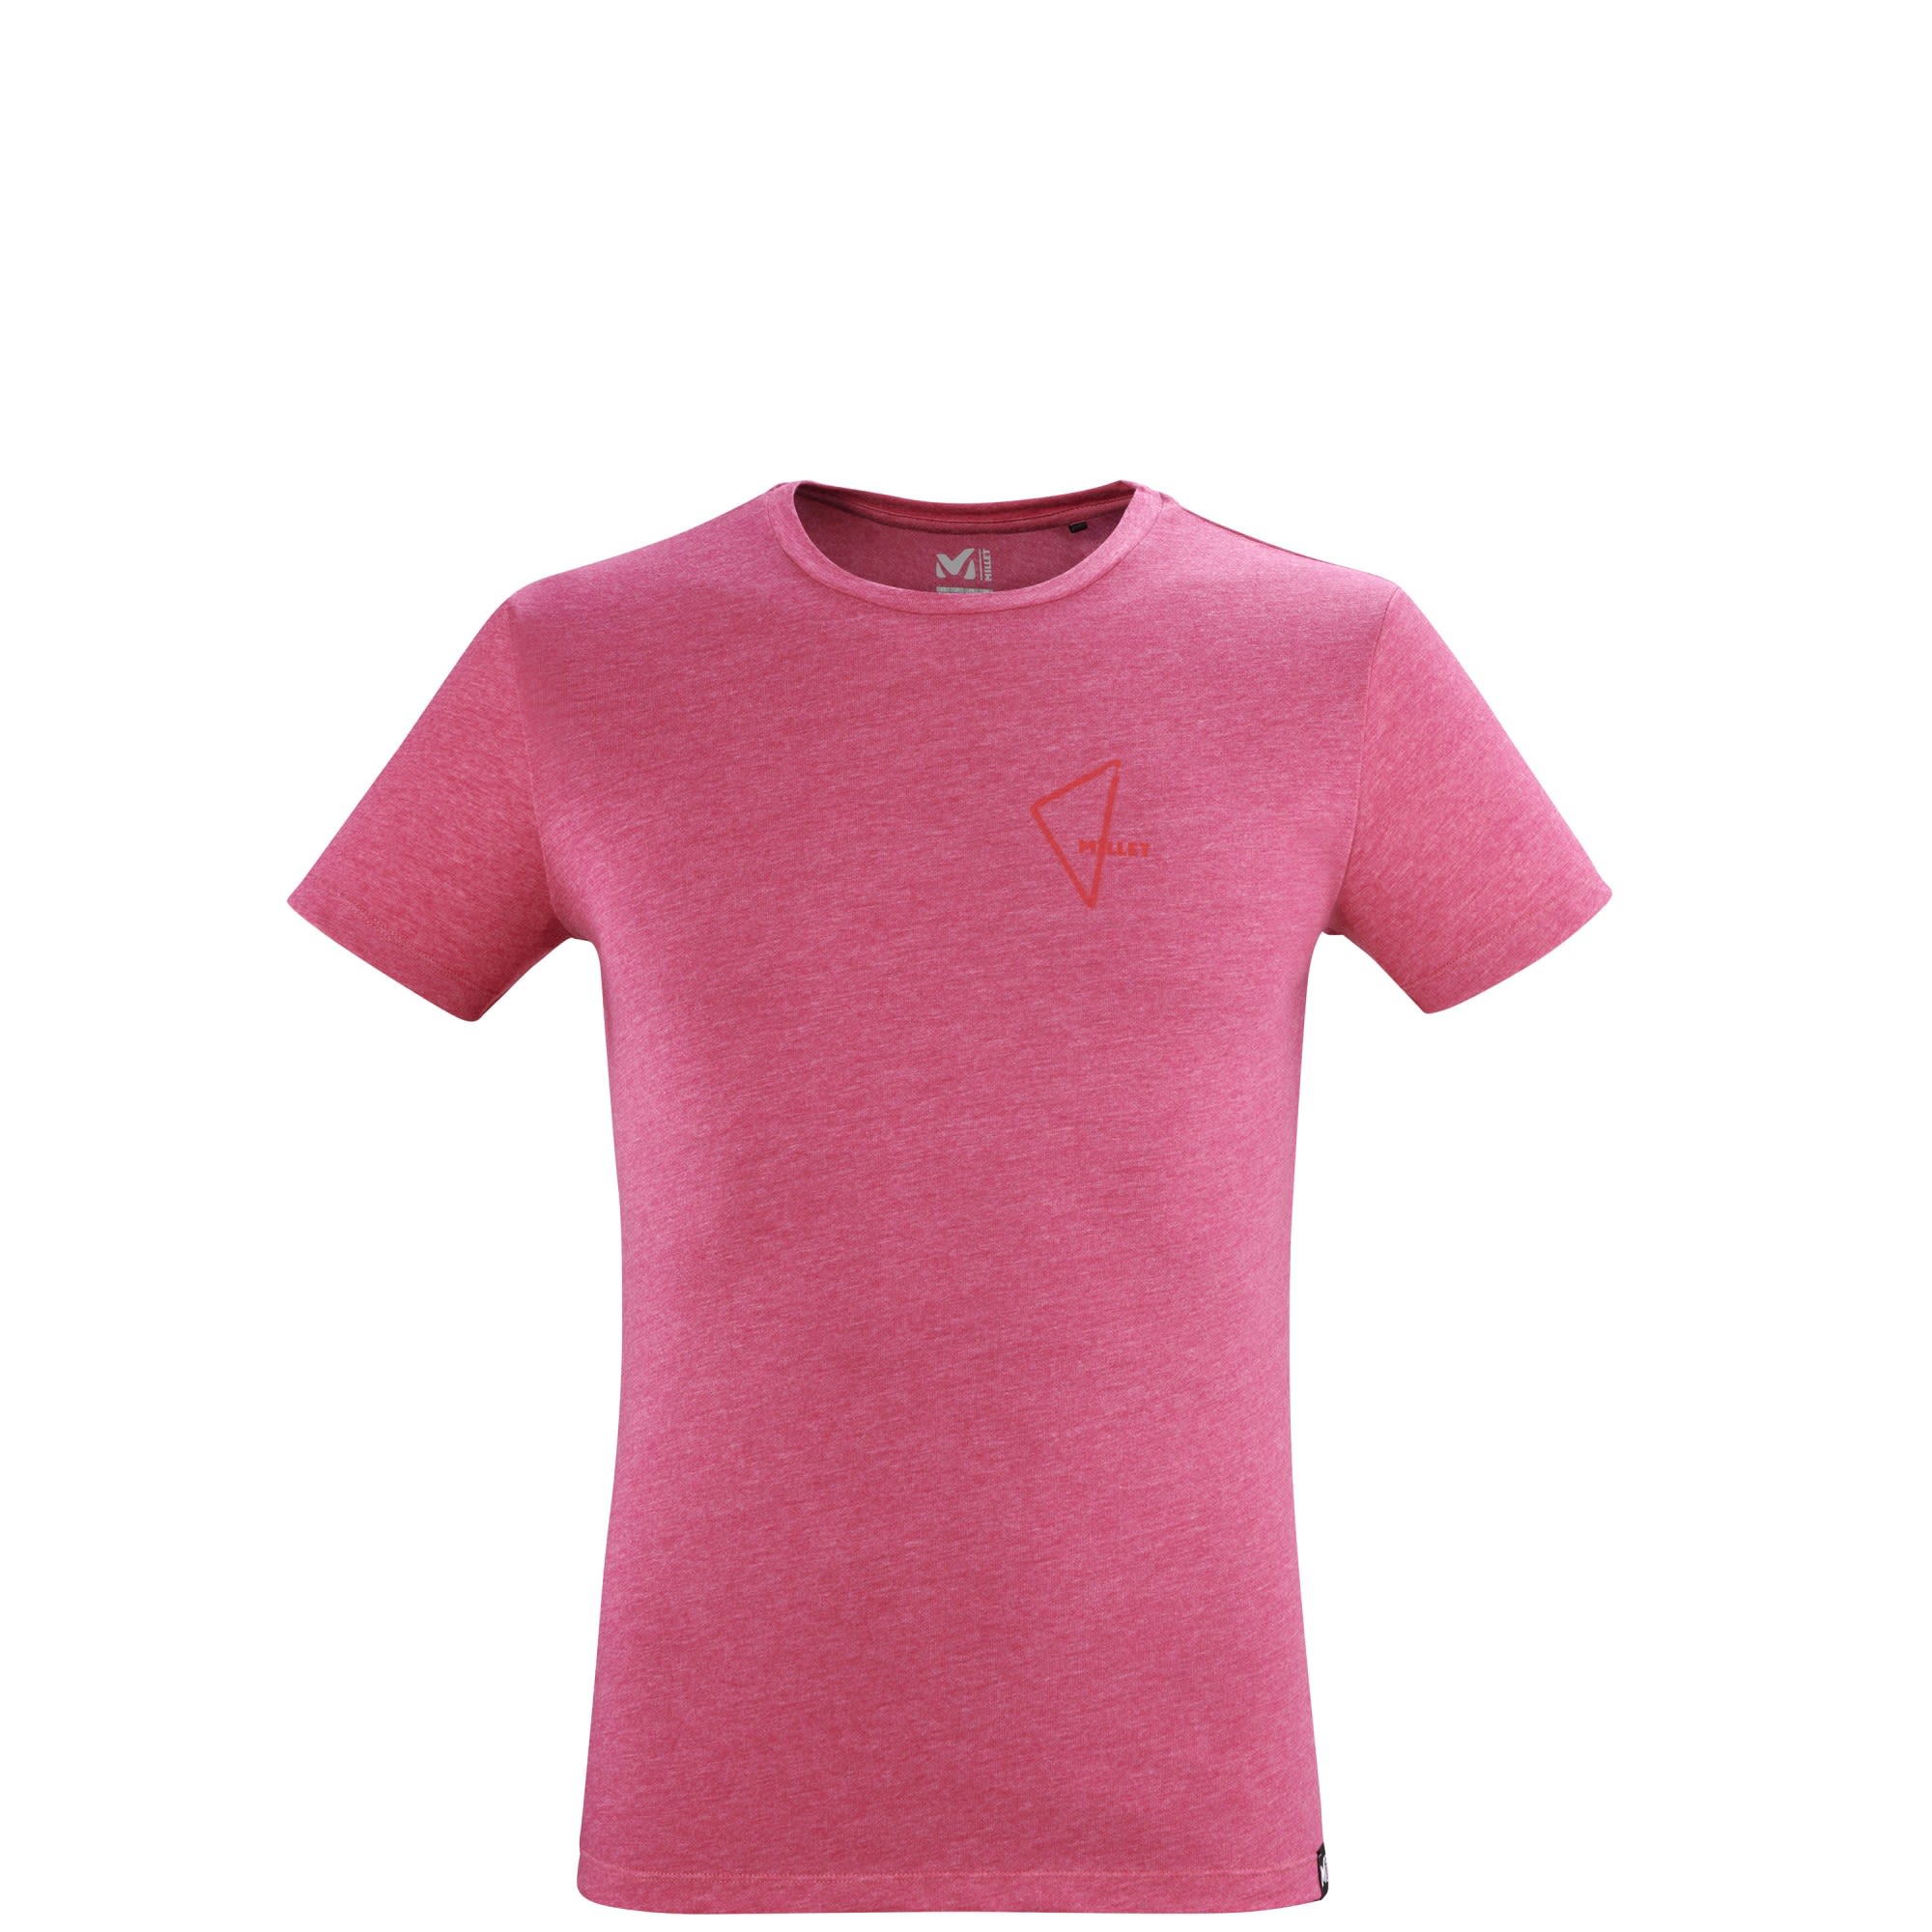 Millet Limited Colors TS Short-Sleeve Pink- Male Kurzarm-Shirts- Grsse L - Farbe Dragon unter Millet